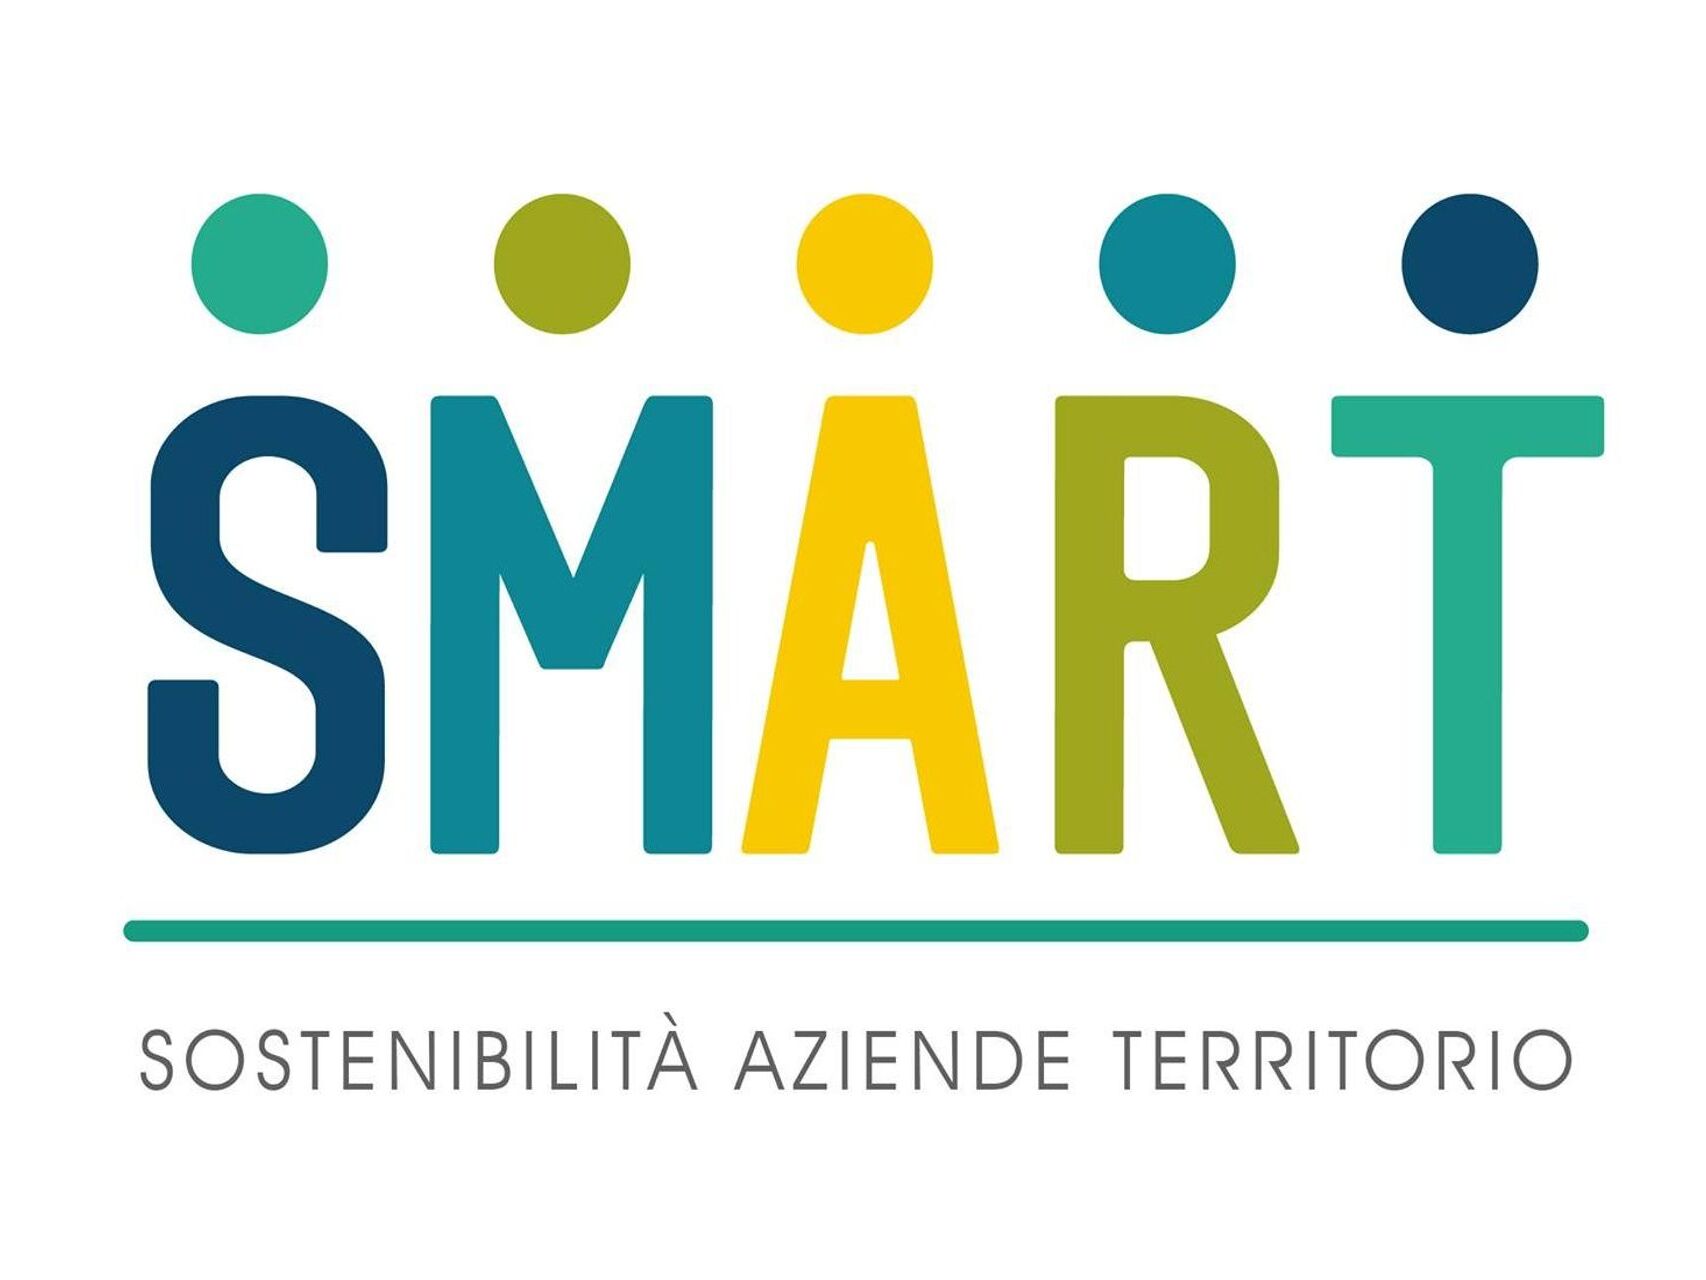 The SMART project logo (Sustainable Strategies and Responsible Business Models in the Cross-Border Territory)